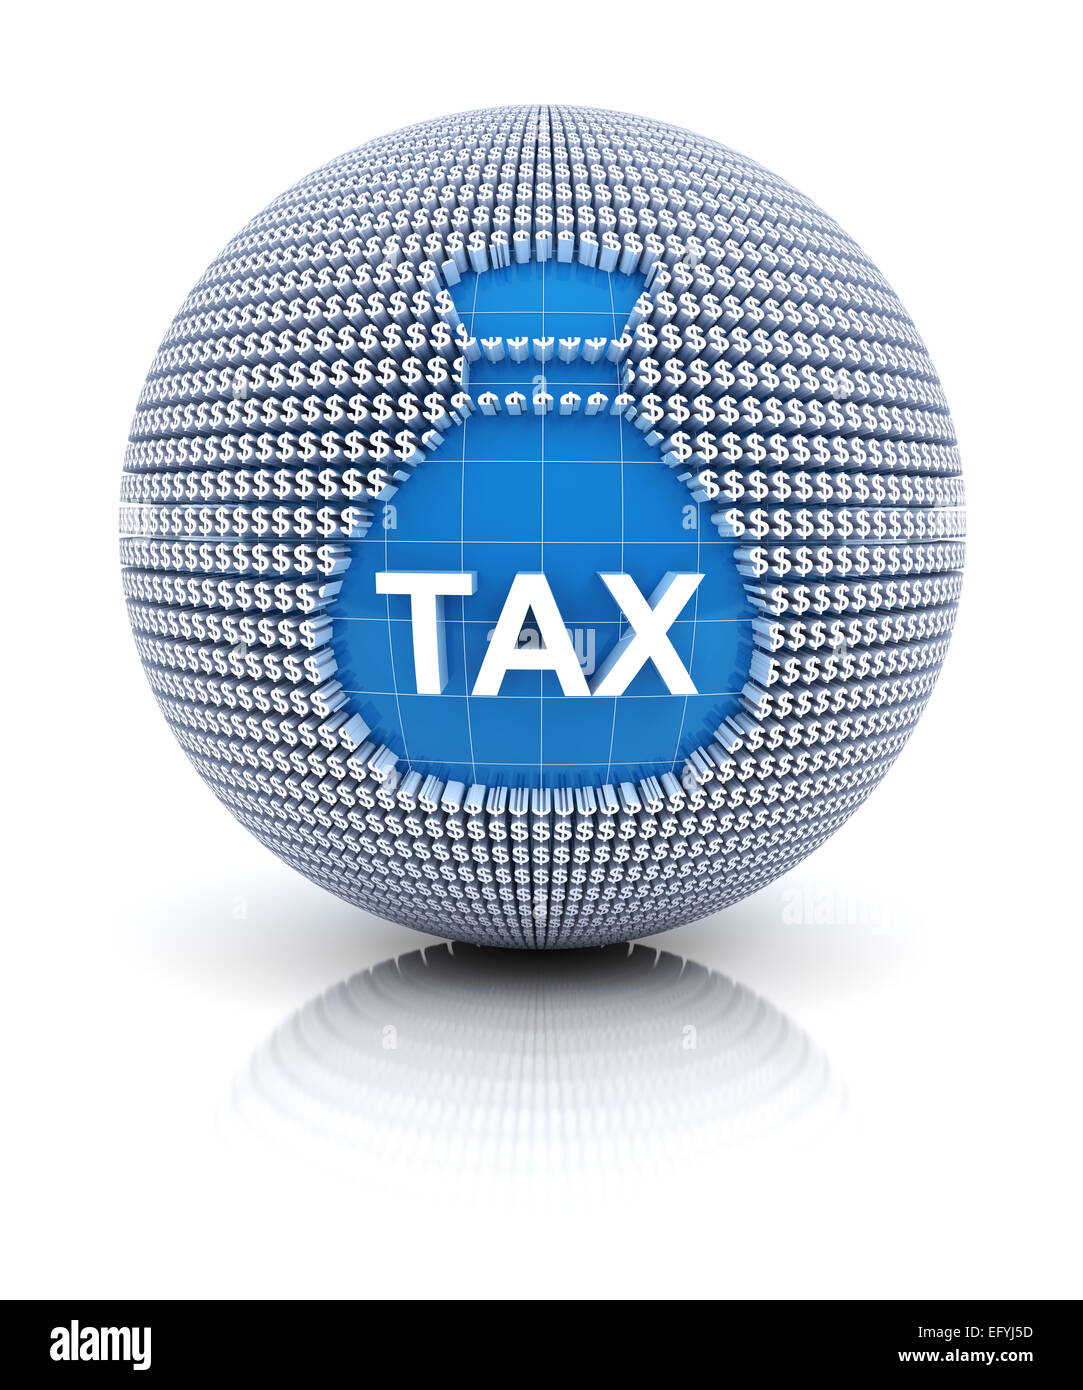 Tax icon on globe formed by dollar sign Stock Photo